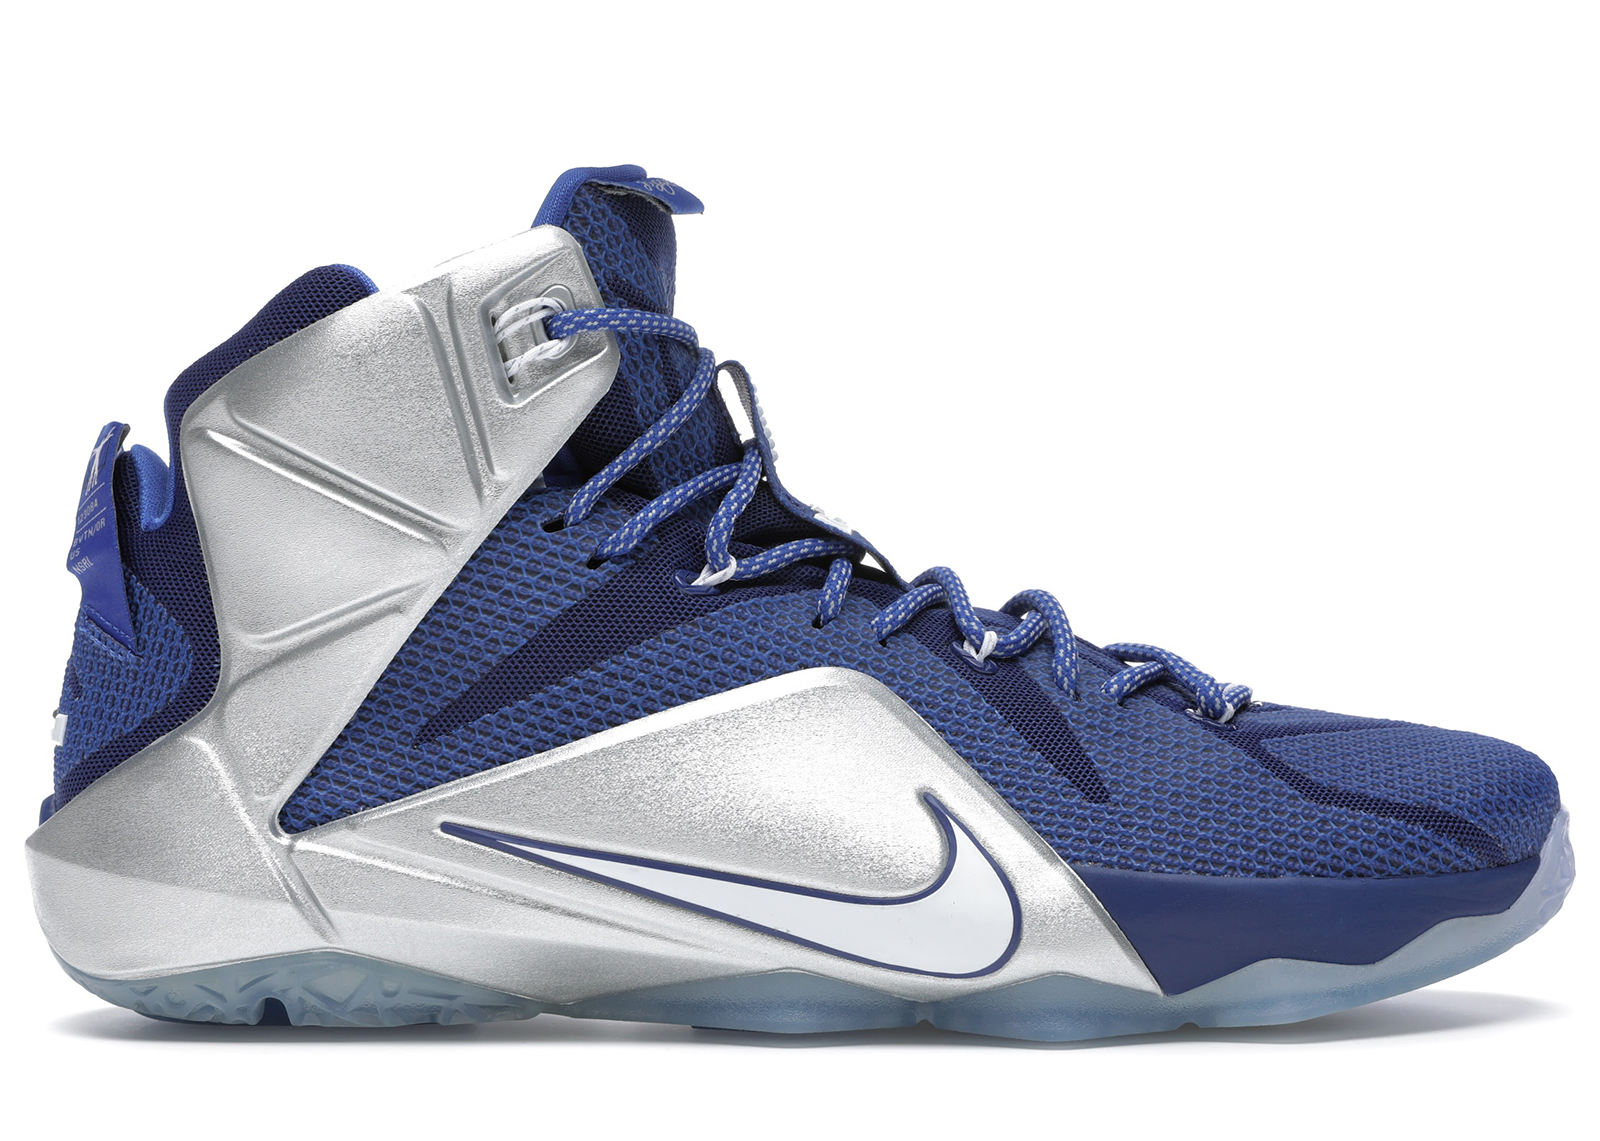 Buy Nike LeBron 12 Shoes & New Sneakers - StockX